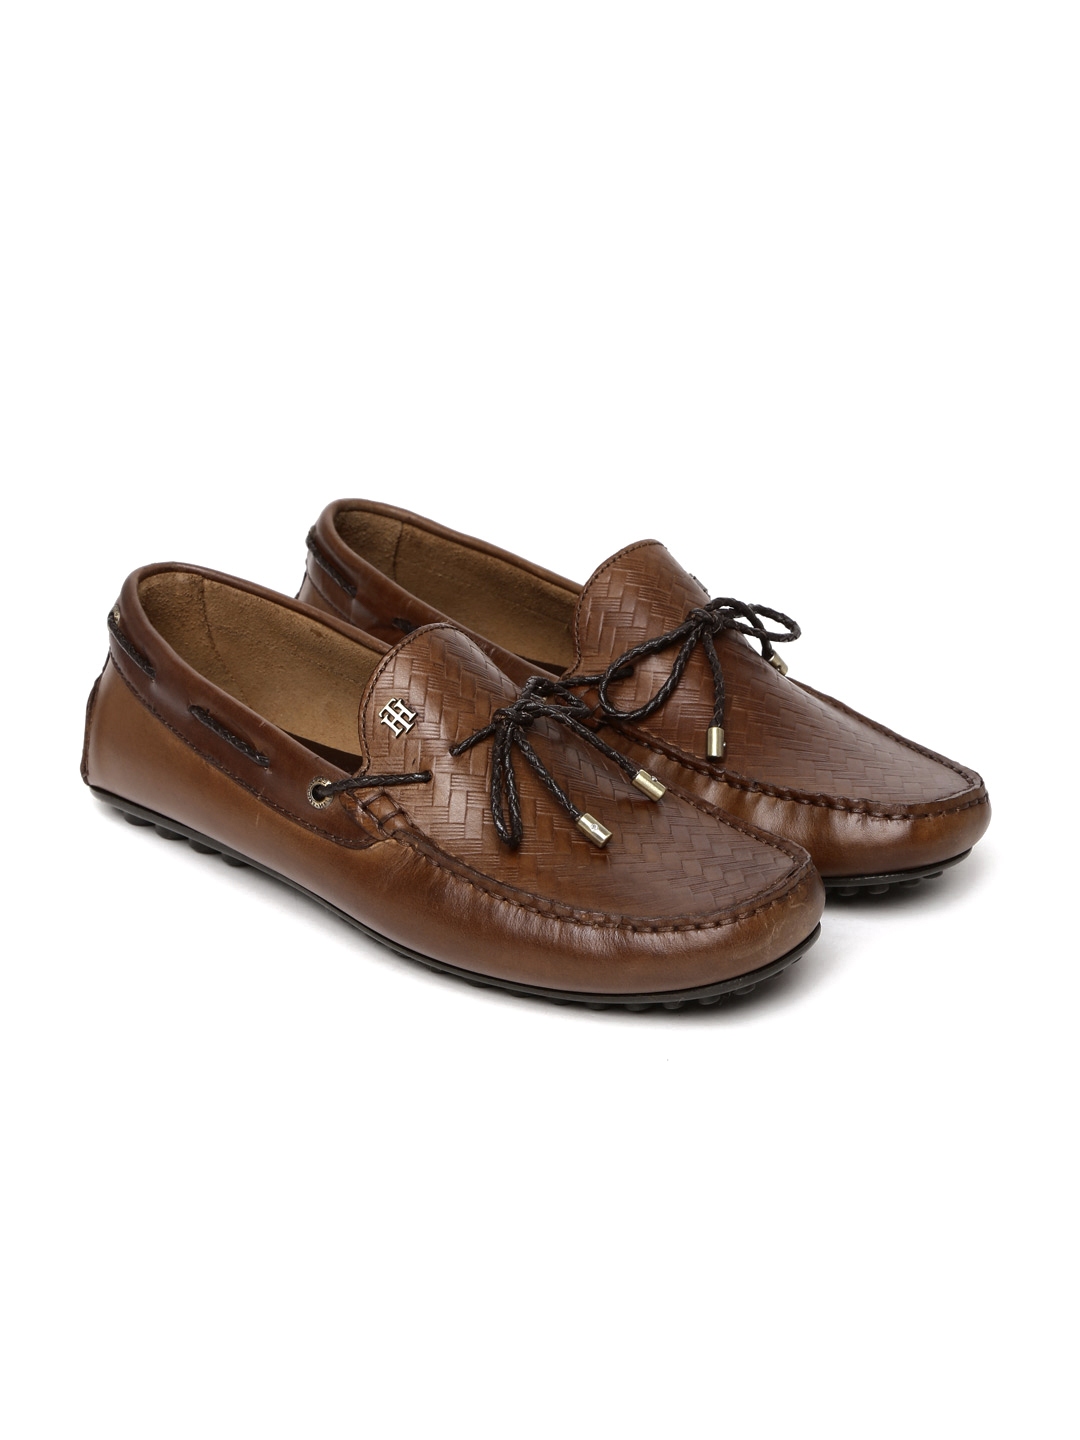 Buy Tommy Hilfiger Men Brown Leather Boat Shoes - Casual Shoes for Men ...